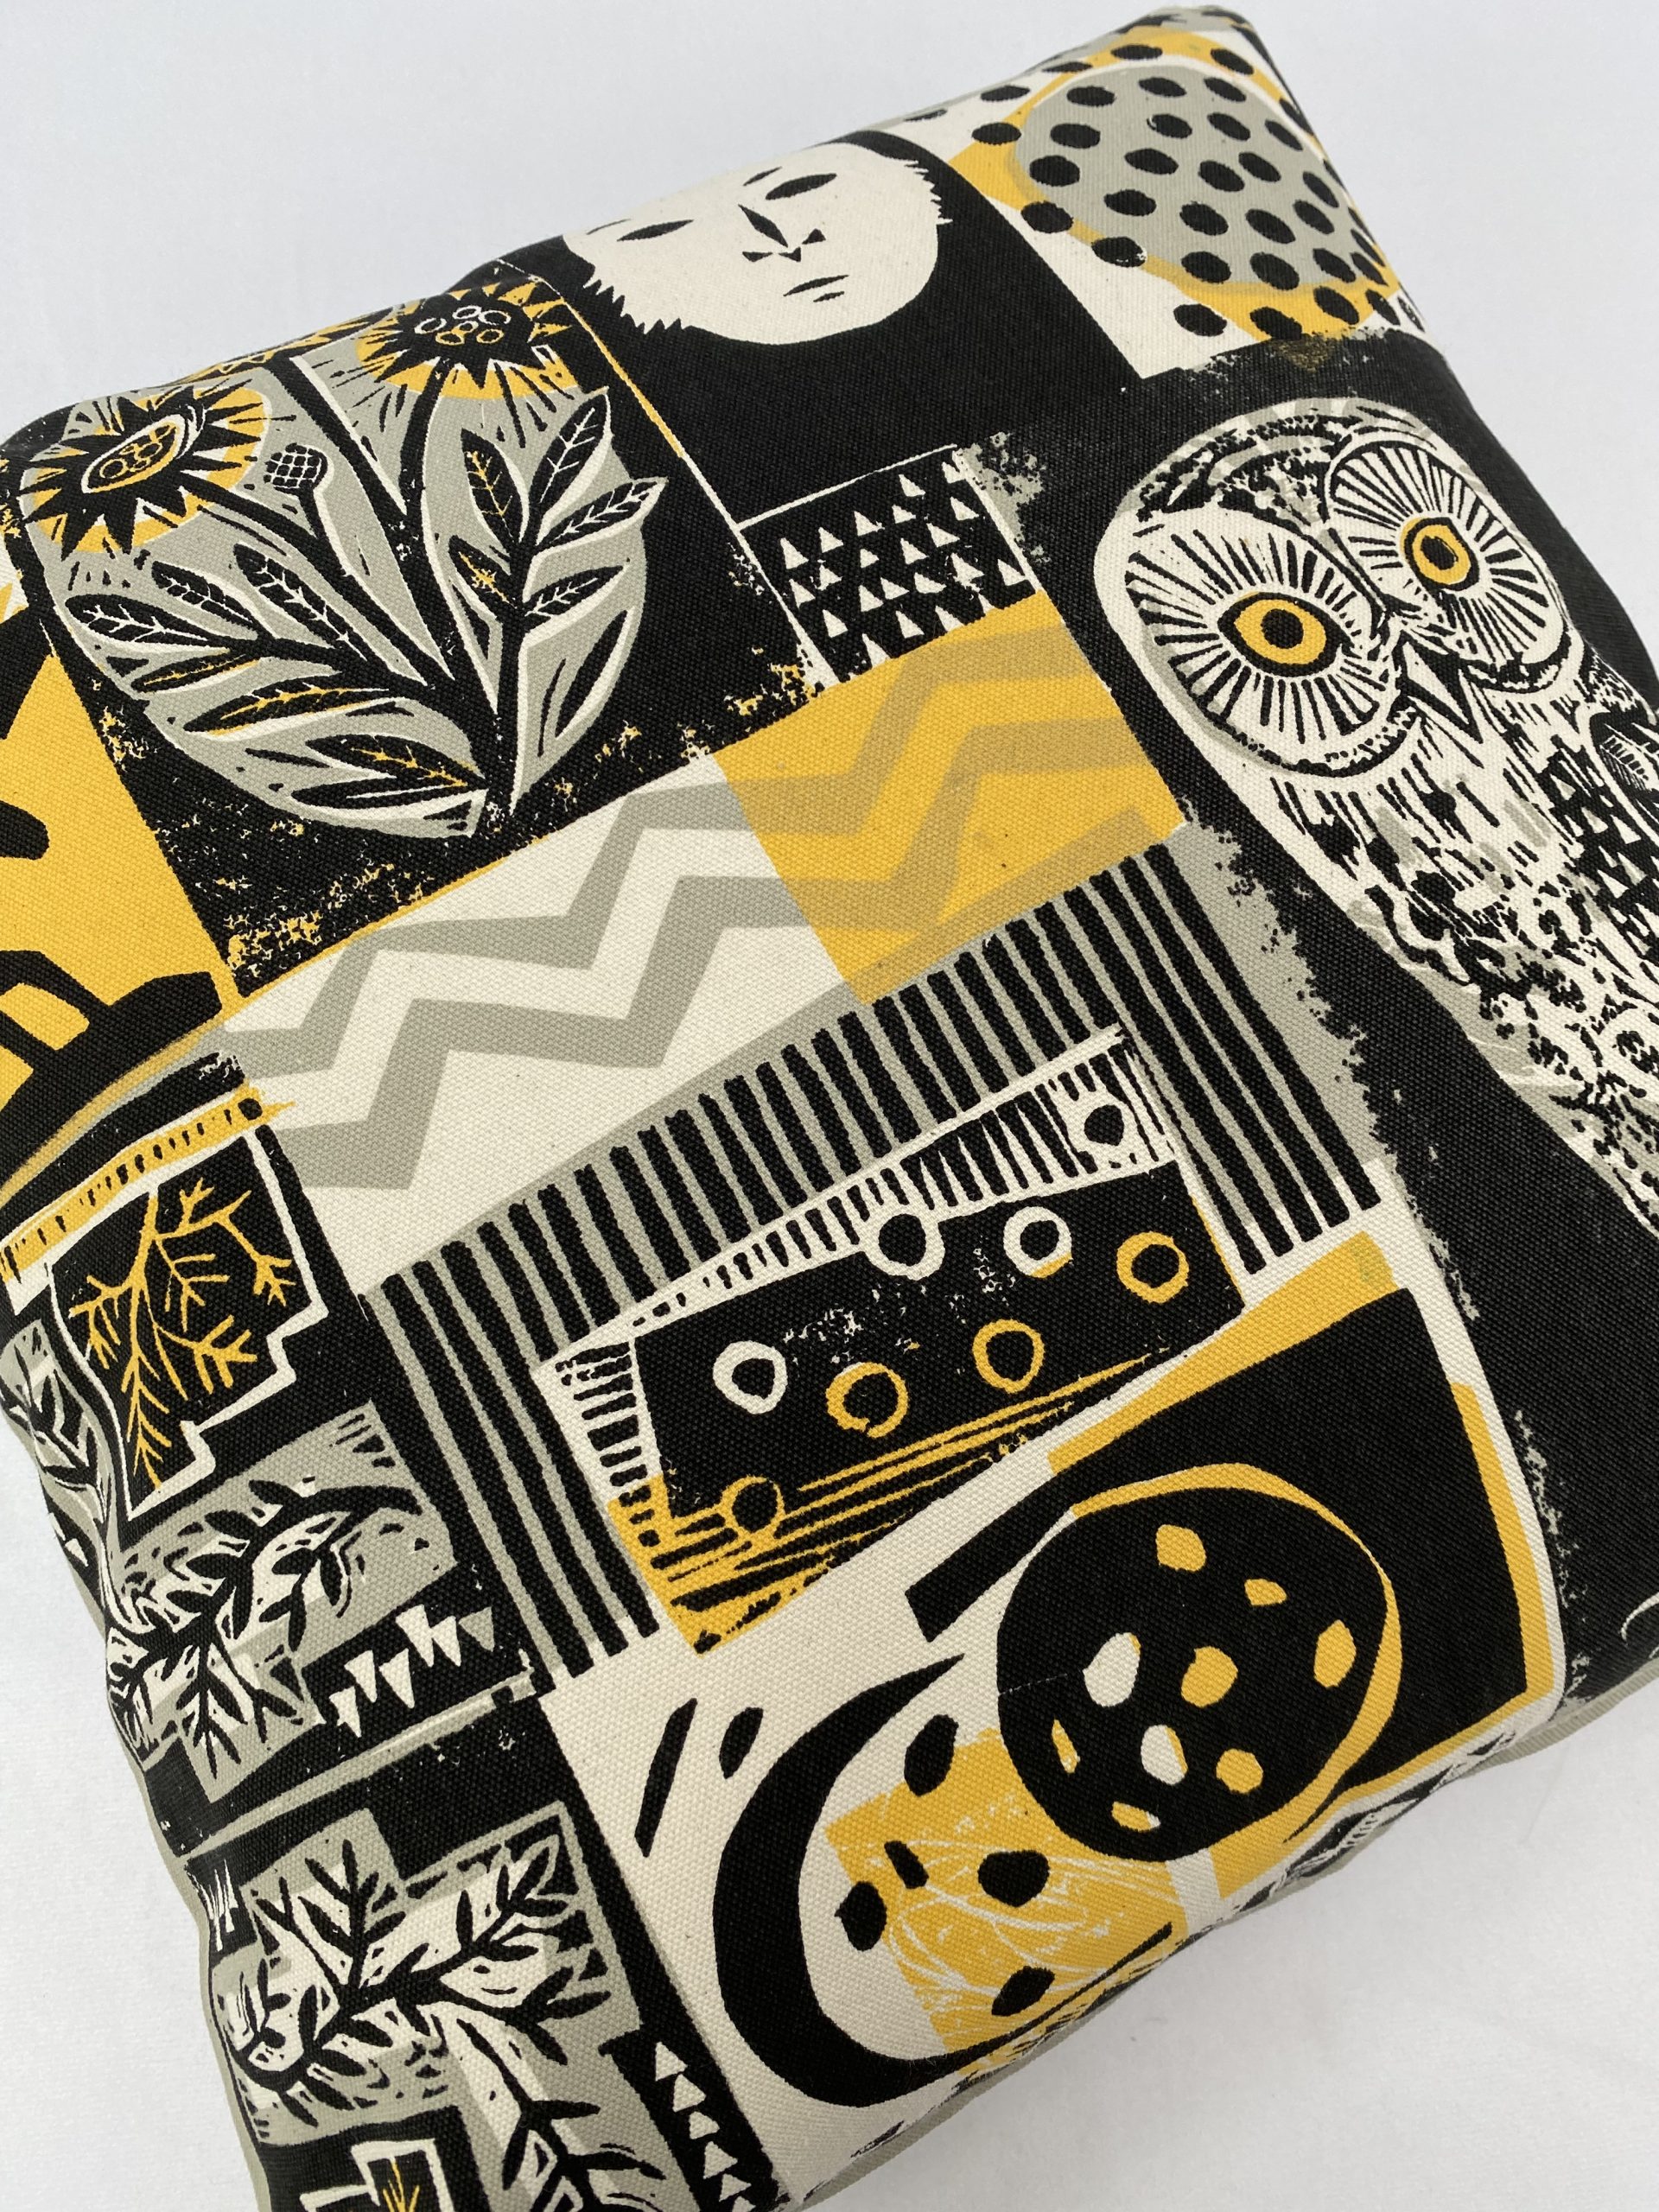 Screen printed merchandise cushion cover by Pul Bristow designed by Mark Herald for Tate_4827